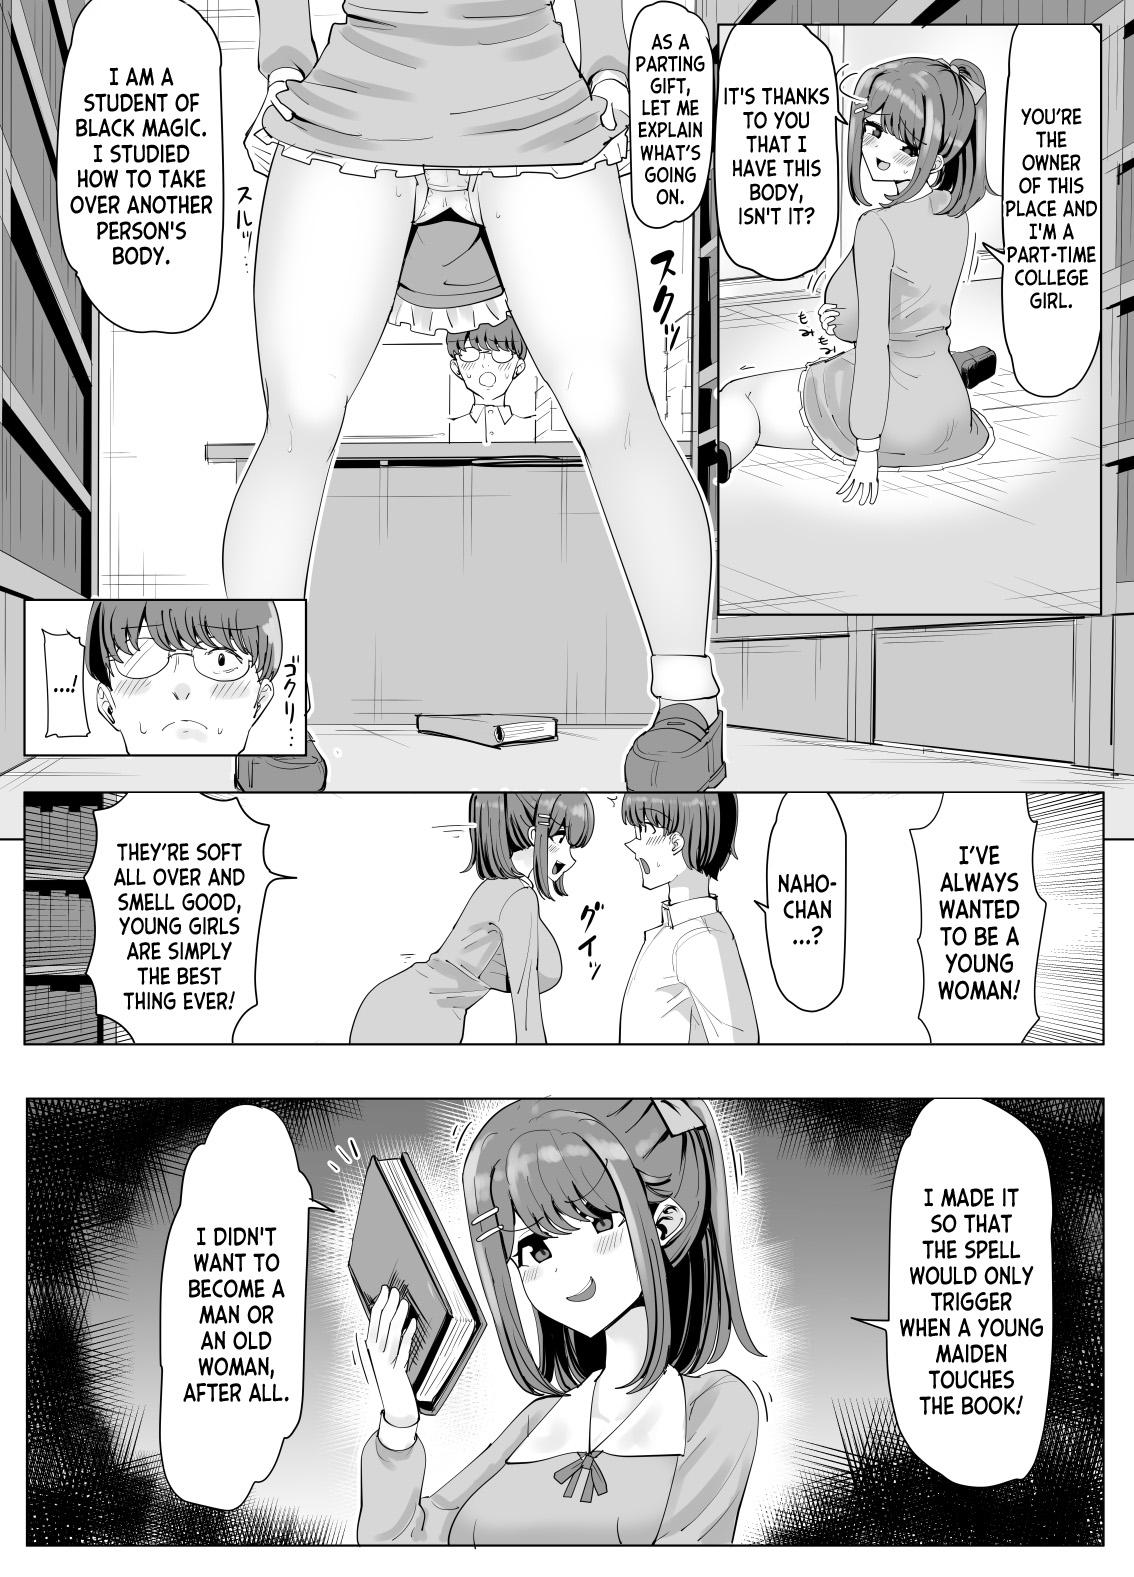 Fat Ass College Girl Taken Over by an Old Man 1-4 - Original Students - Page 5